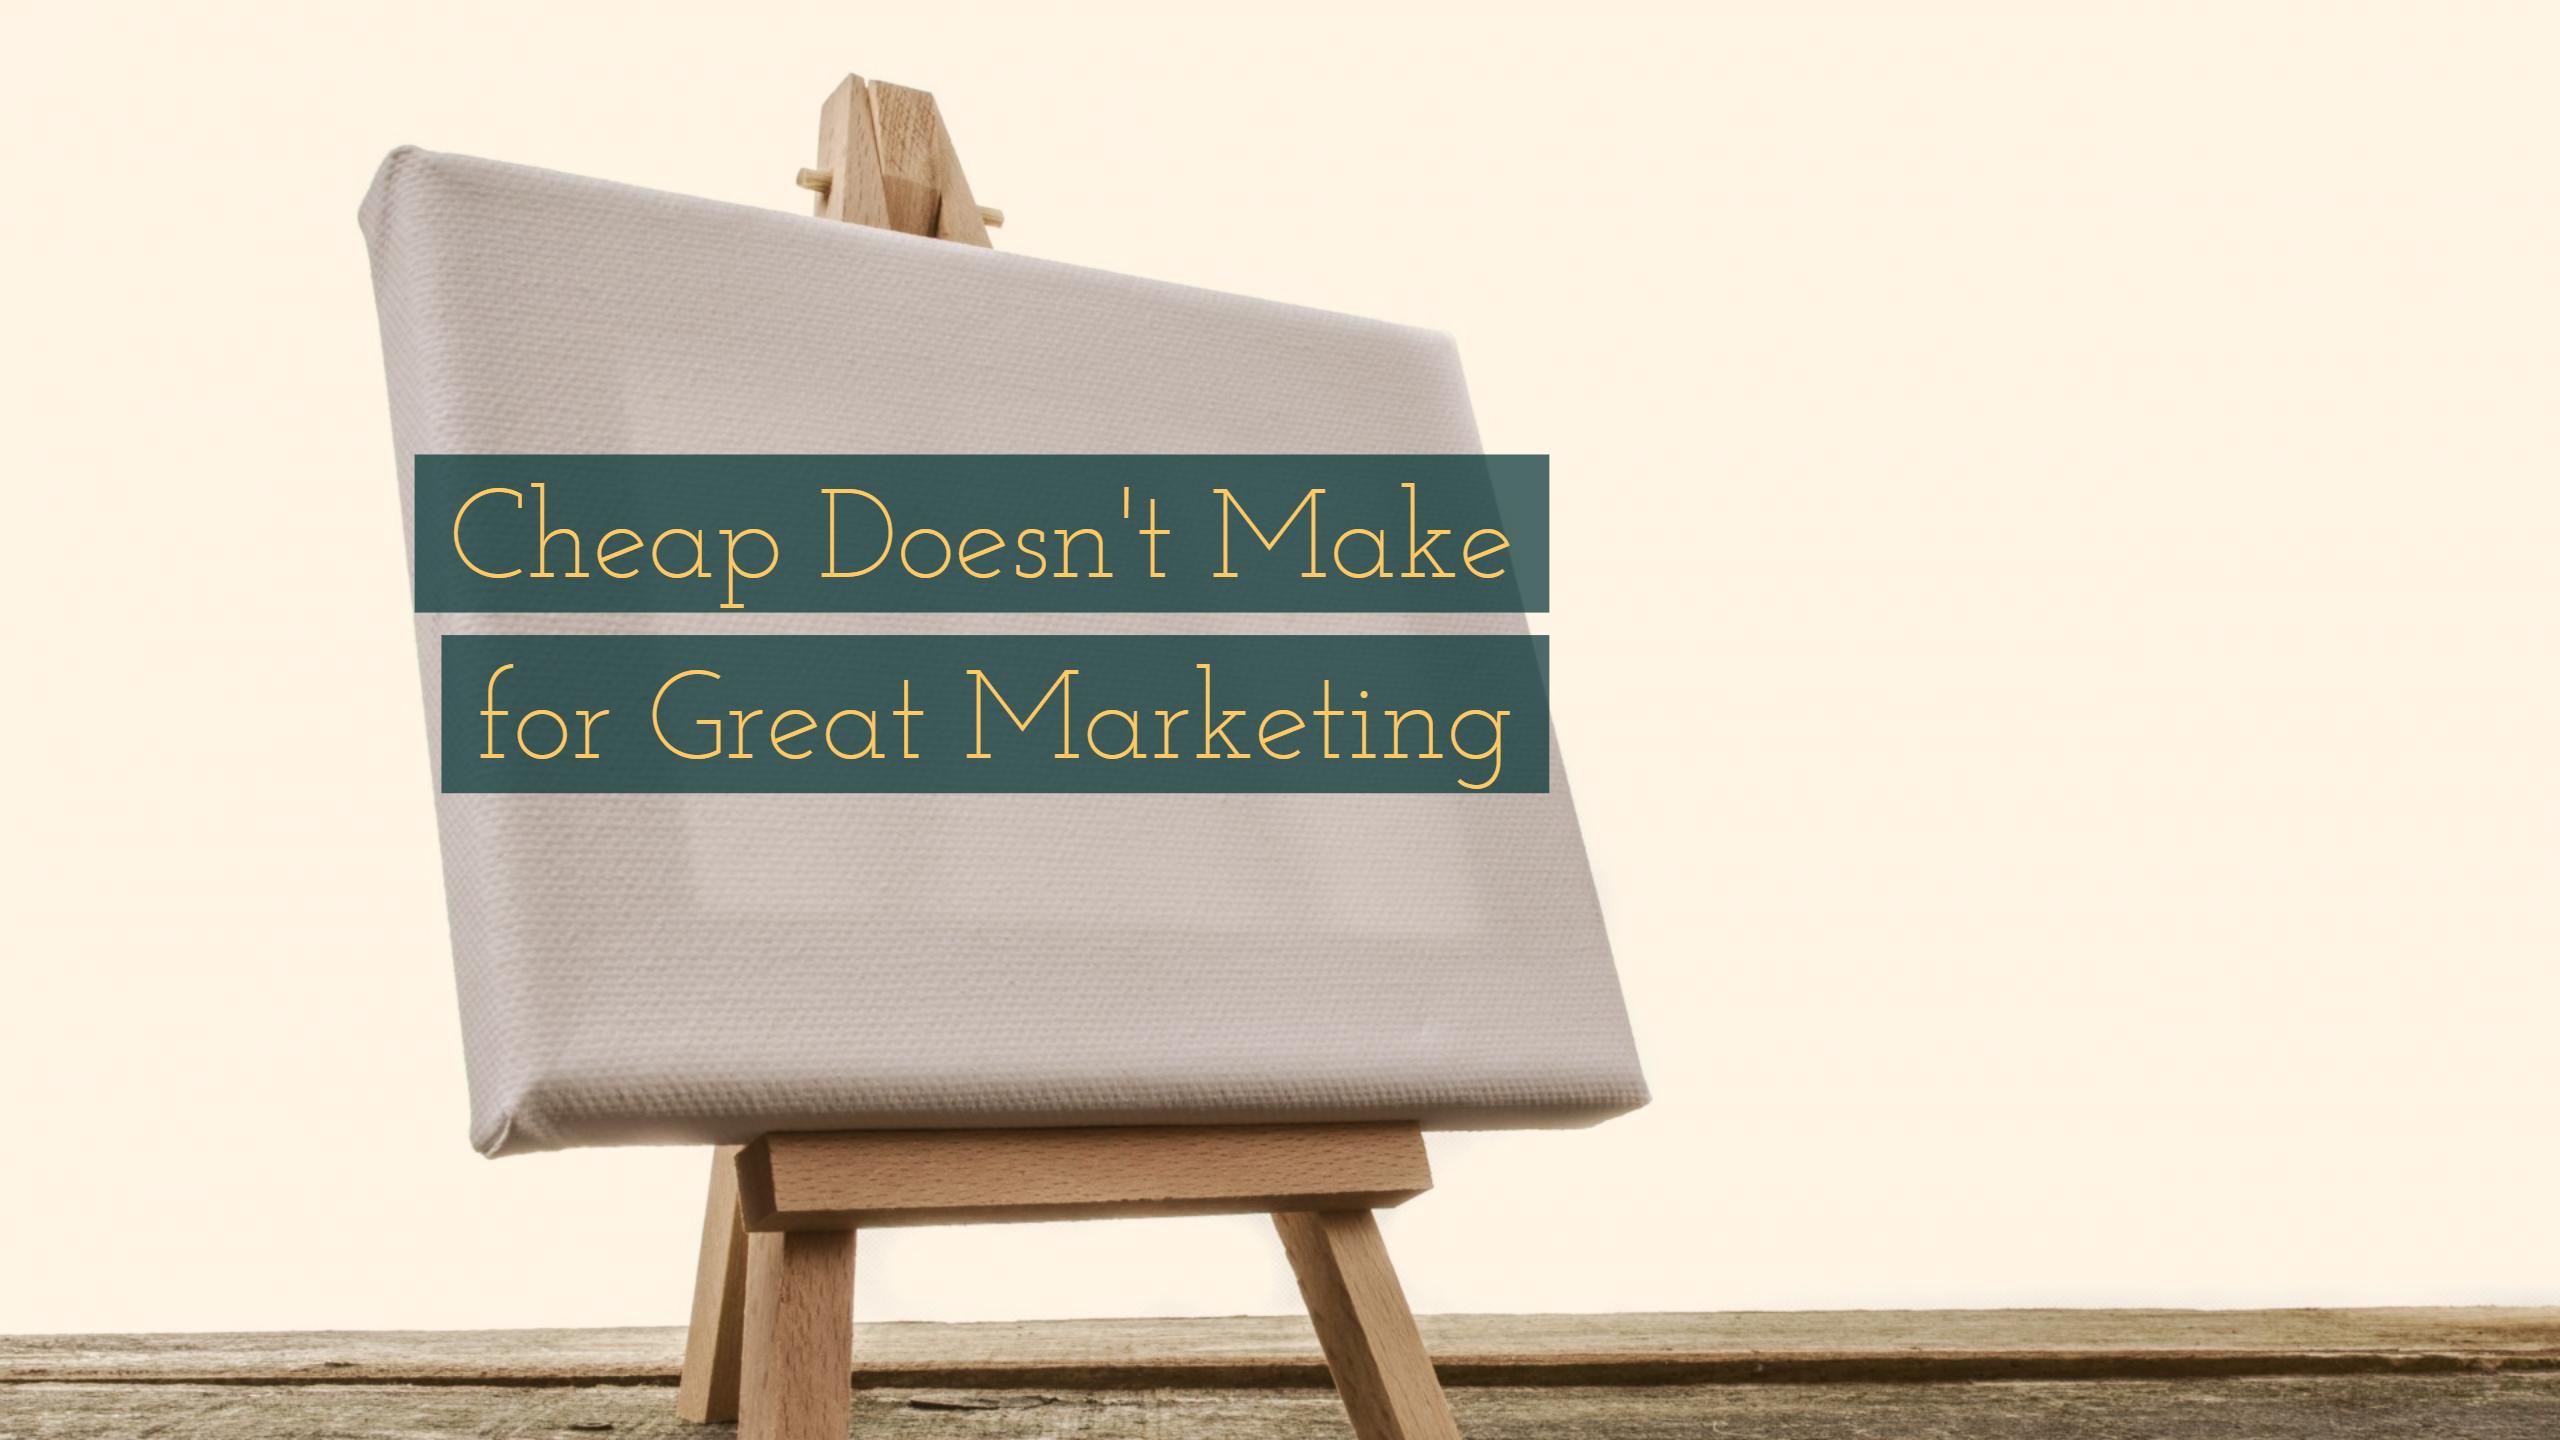 Great marketing keeps your audience in mind